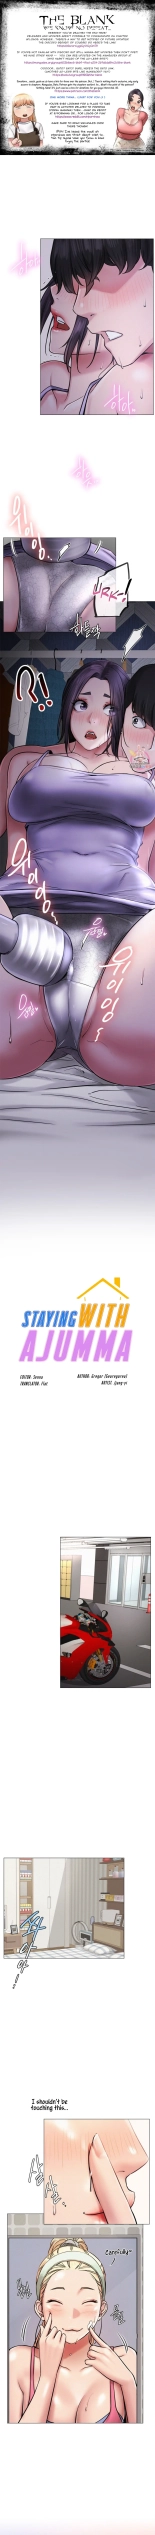 Staying with Ajumma : page 58